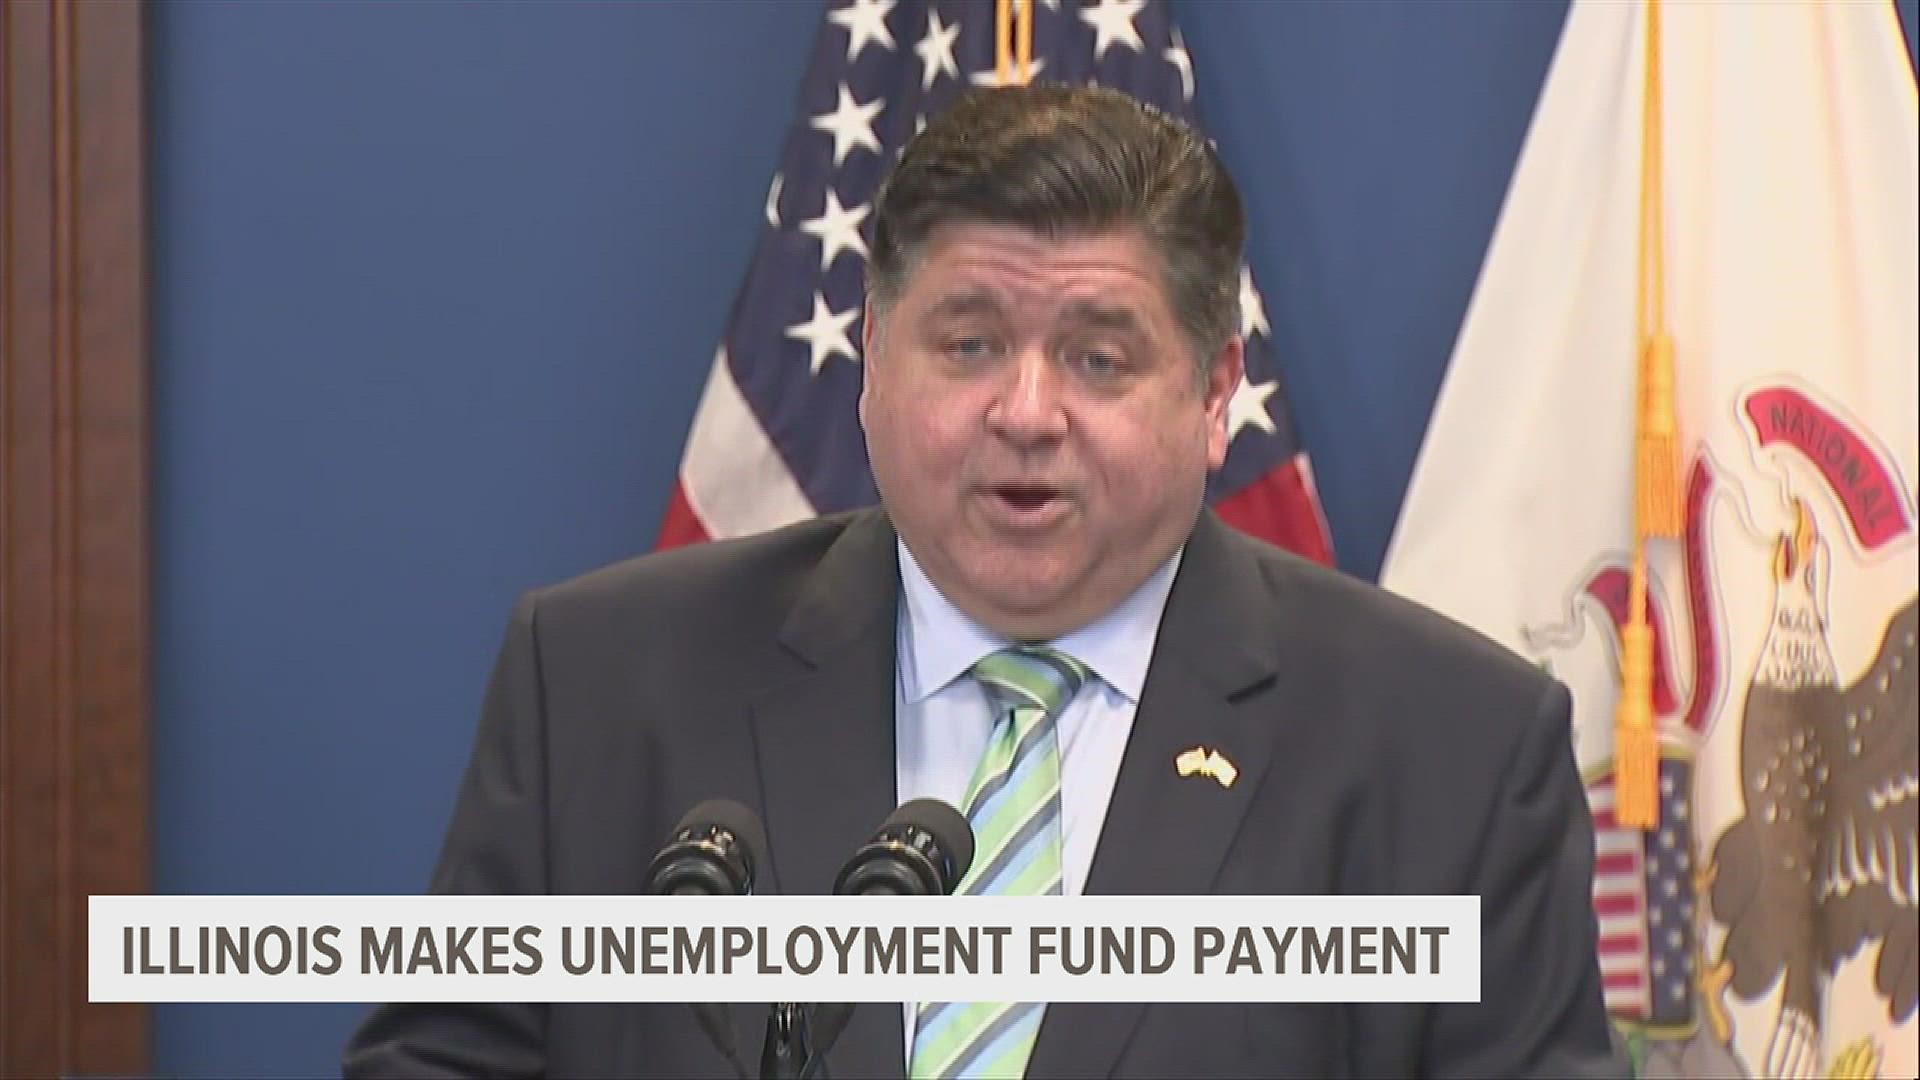 Pritzker said the state’s relatively low jobless rate will help him keep his promise to eliminate debt in the state fund that pays unemployment benefits.